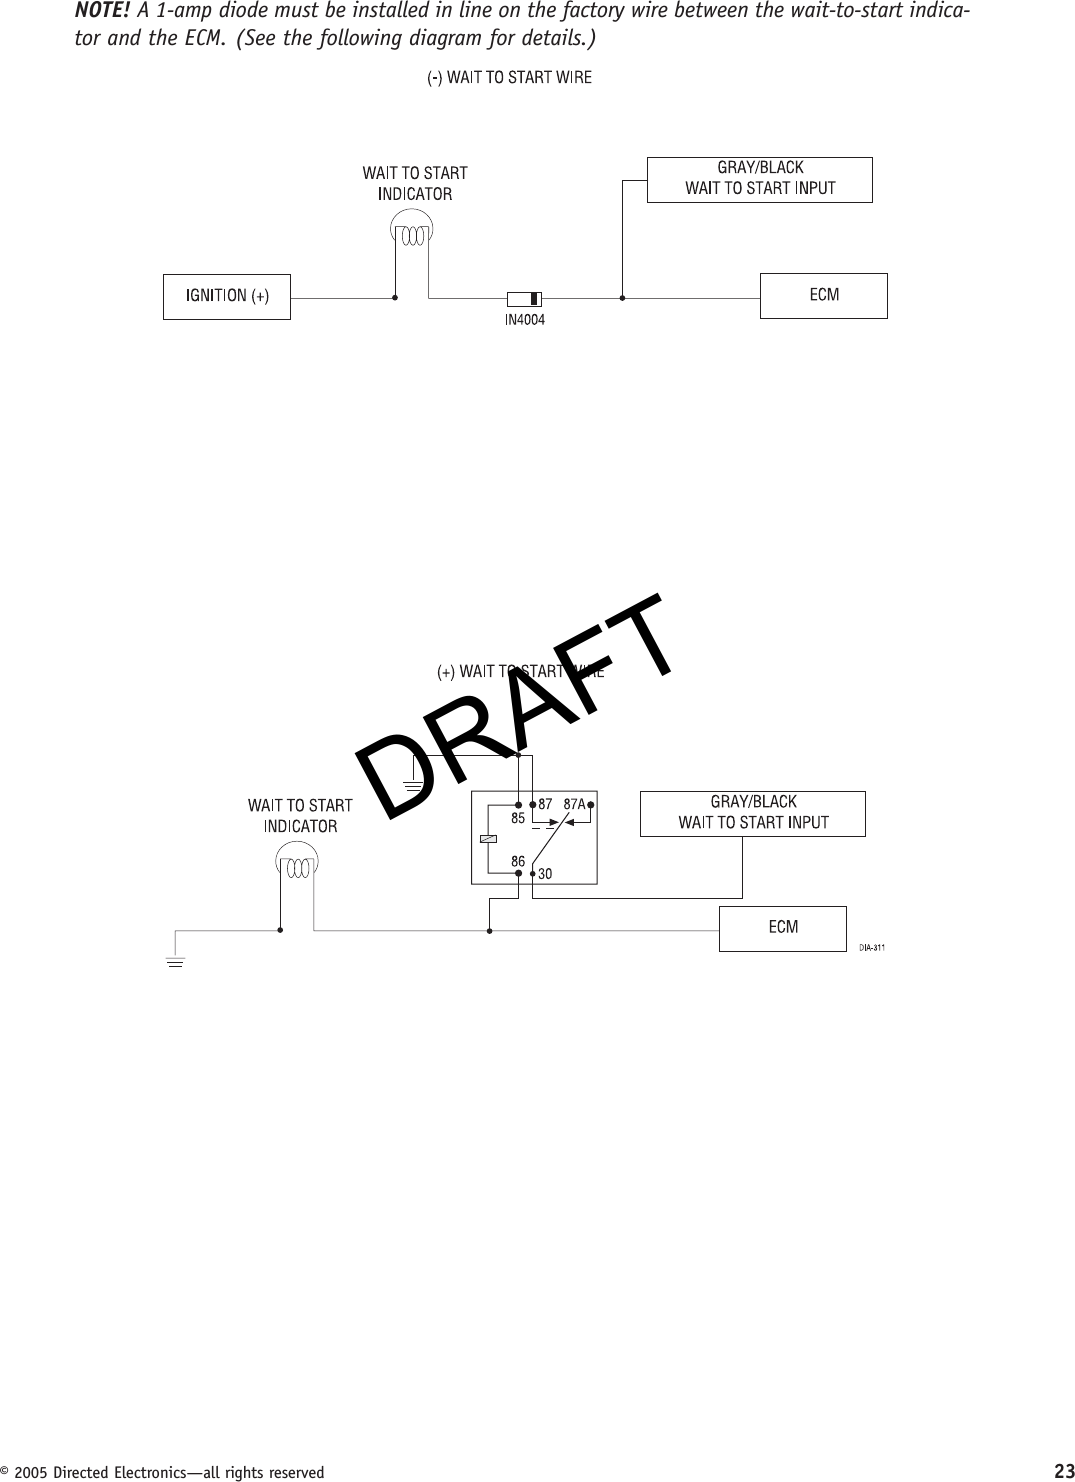 DRAFT© 2005 Directed Electronics—all rights reserved 23NOTE! A 1-amp diode must be installed in line on the factory wire between the wait-to-start indica-tor and the ECM. (See the following diagram for details.)DRAFT